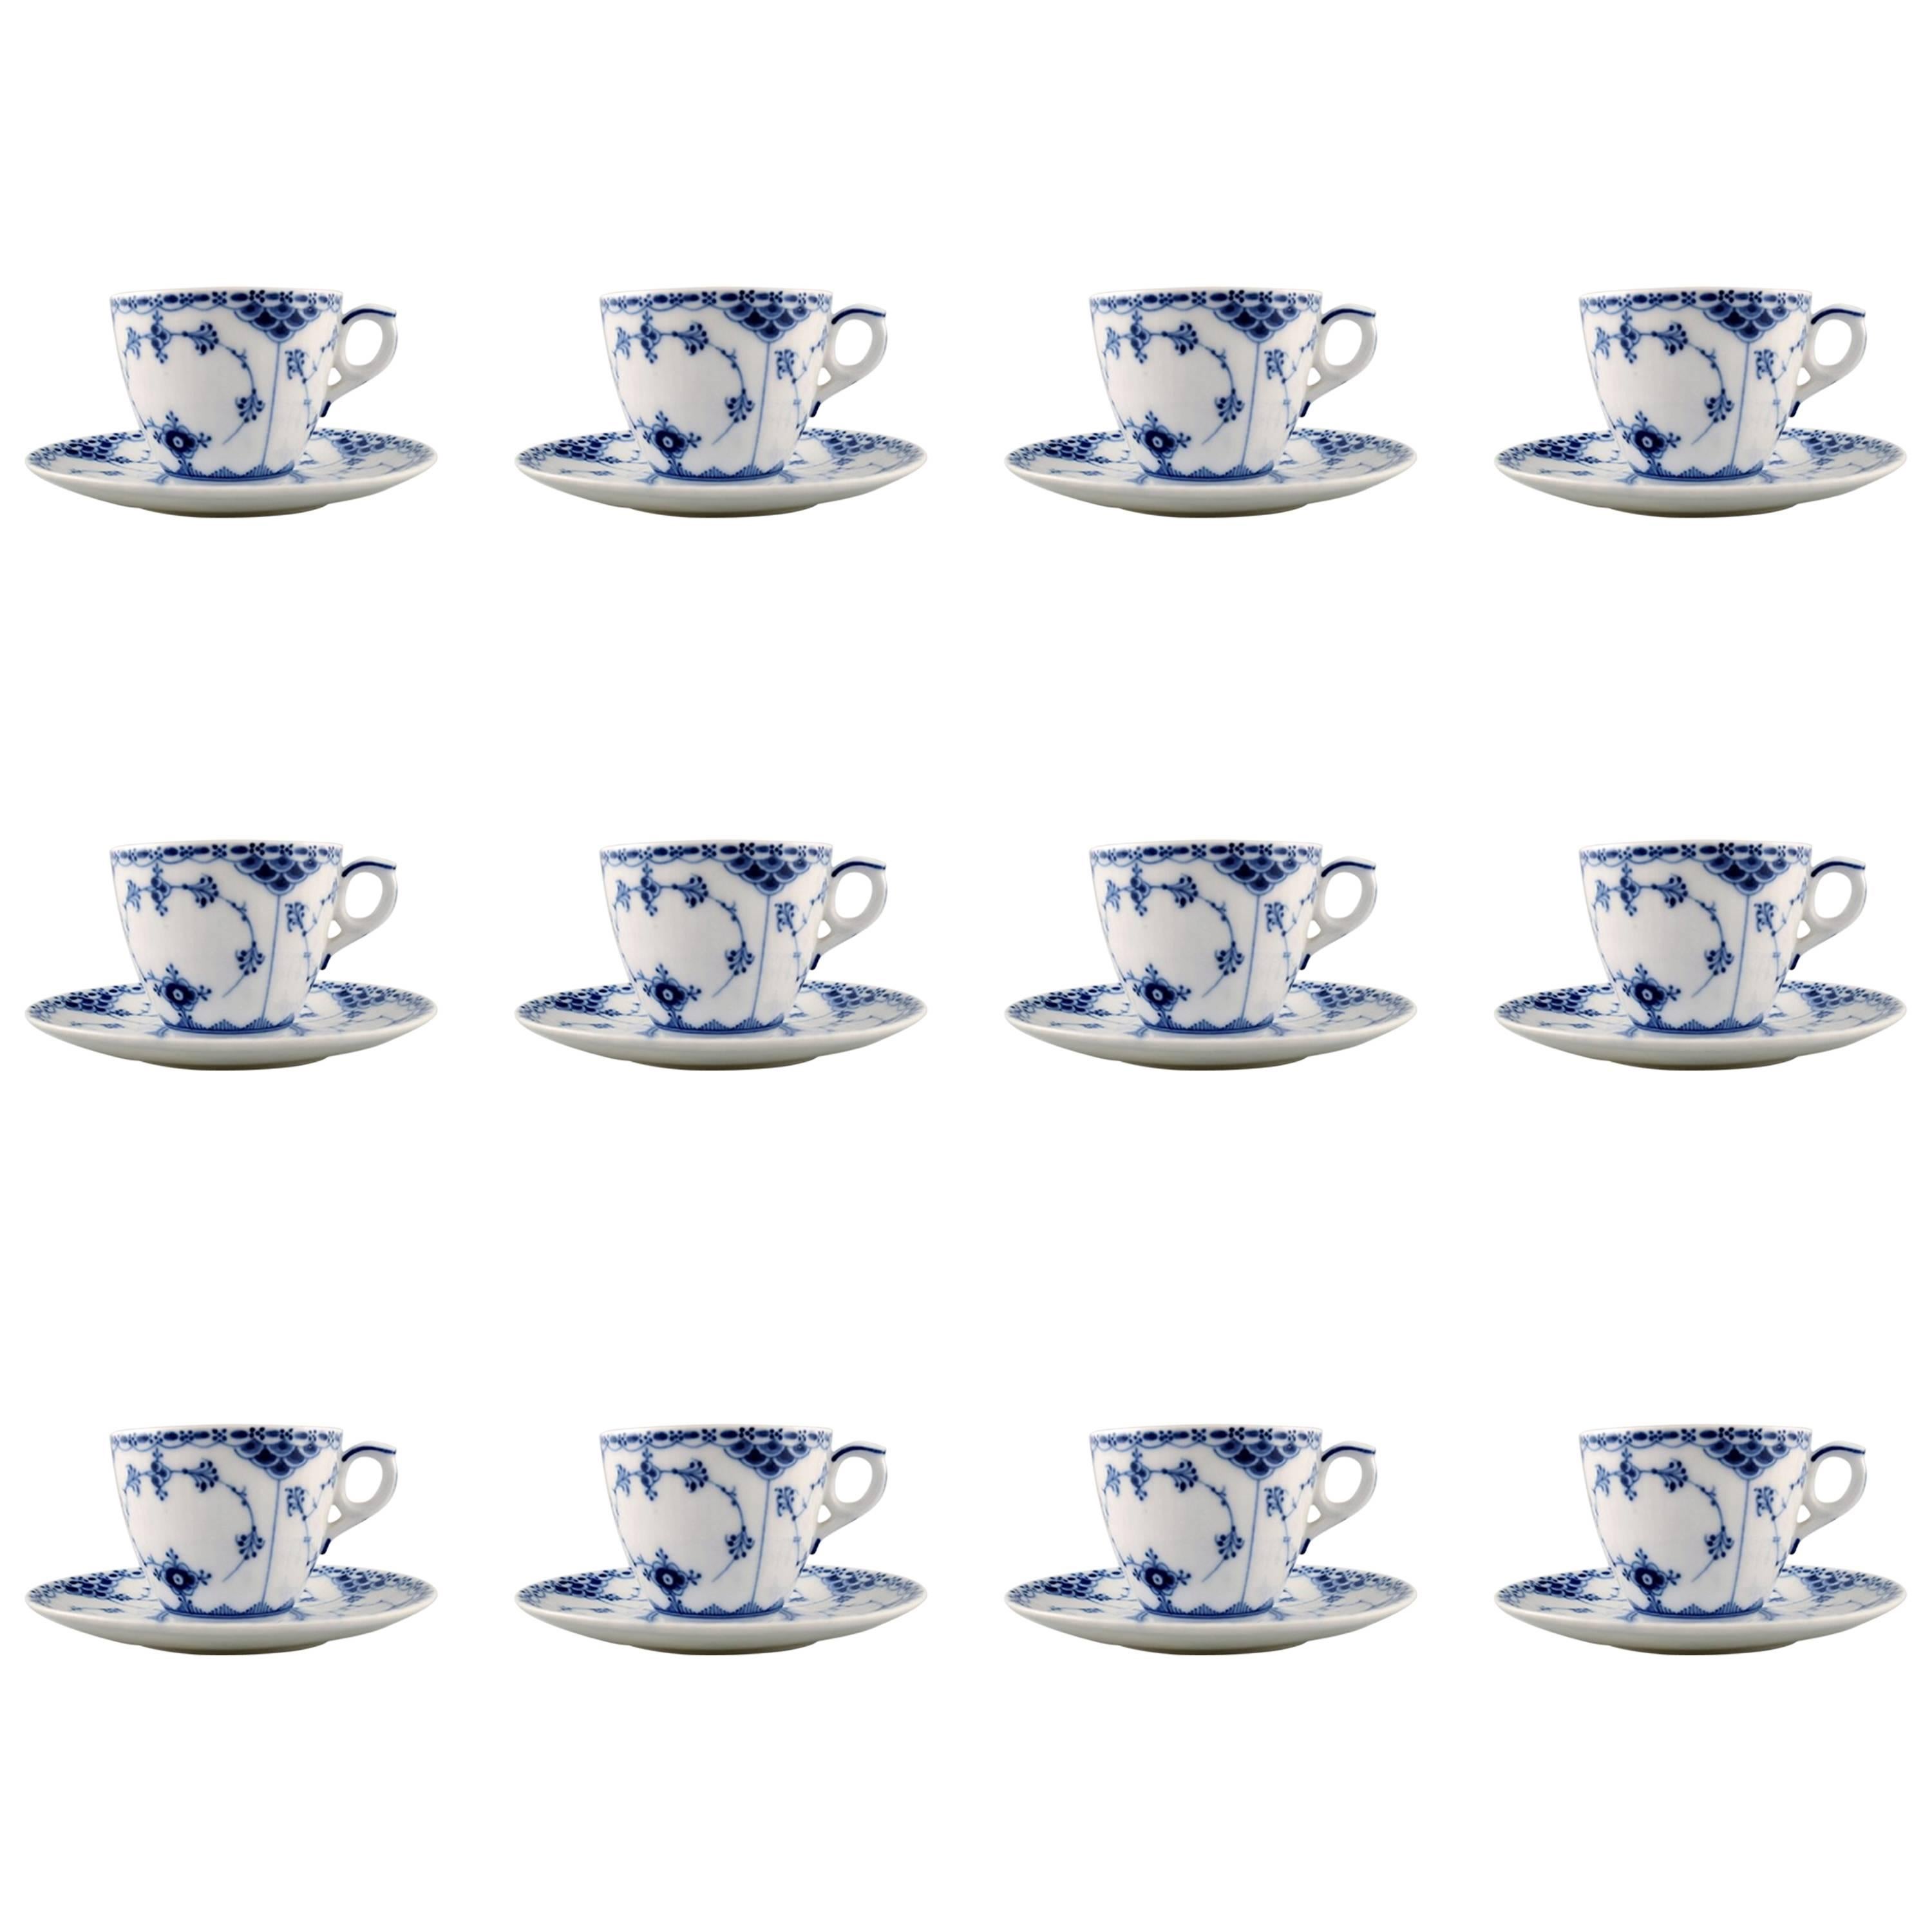 12 Sets Royal Copenhagen Blue Fluted Half Lace Coffee Cup and Saucer